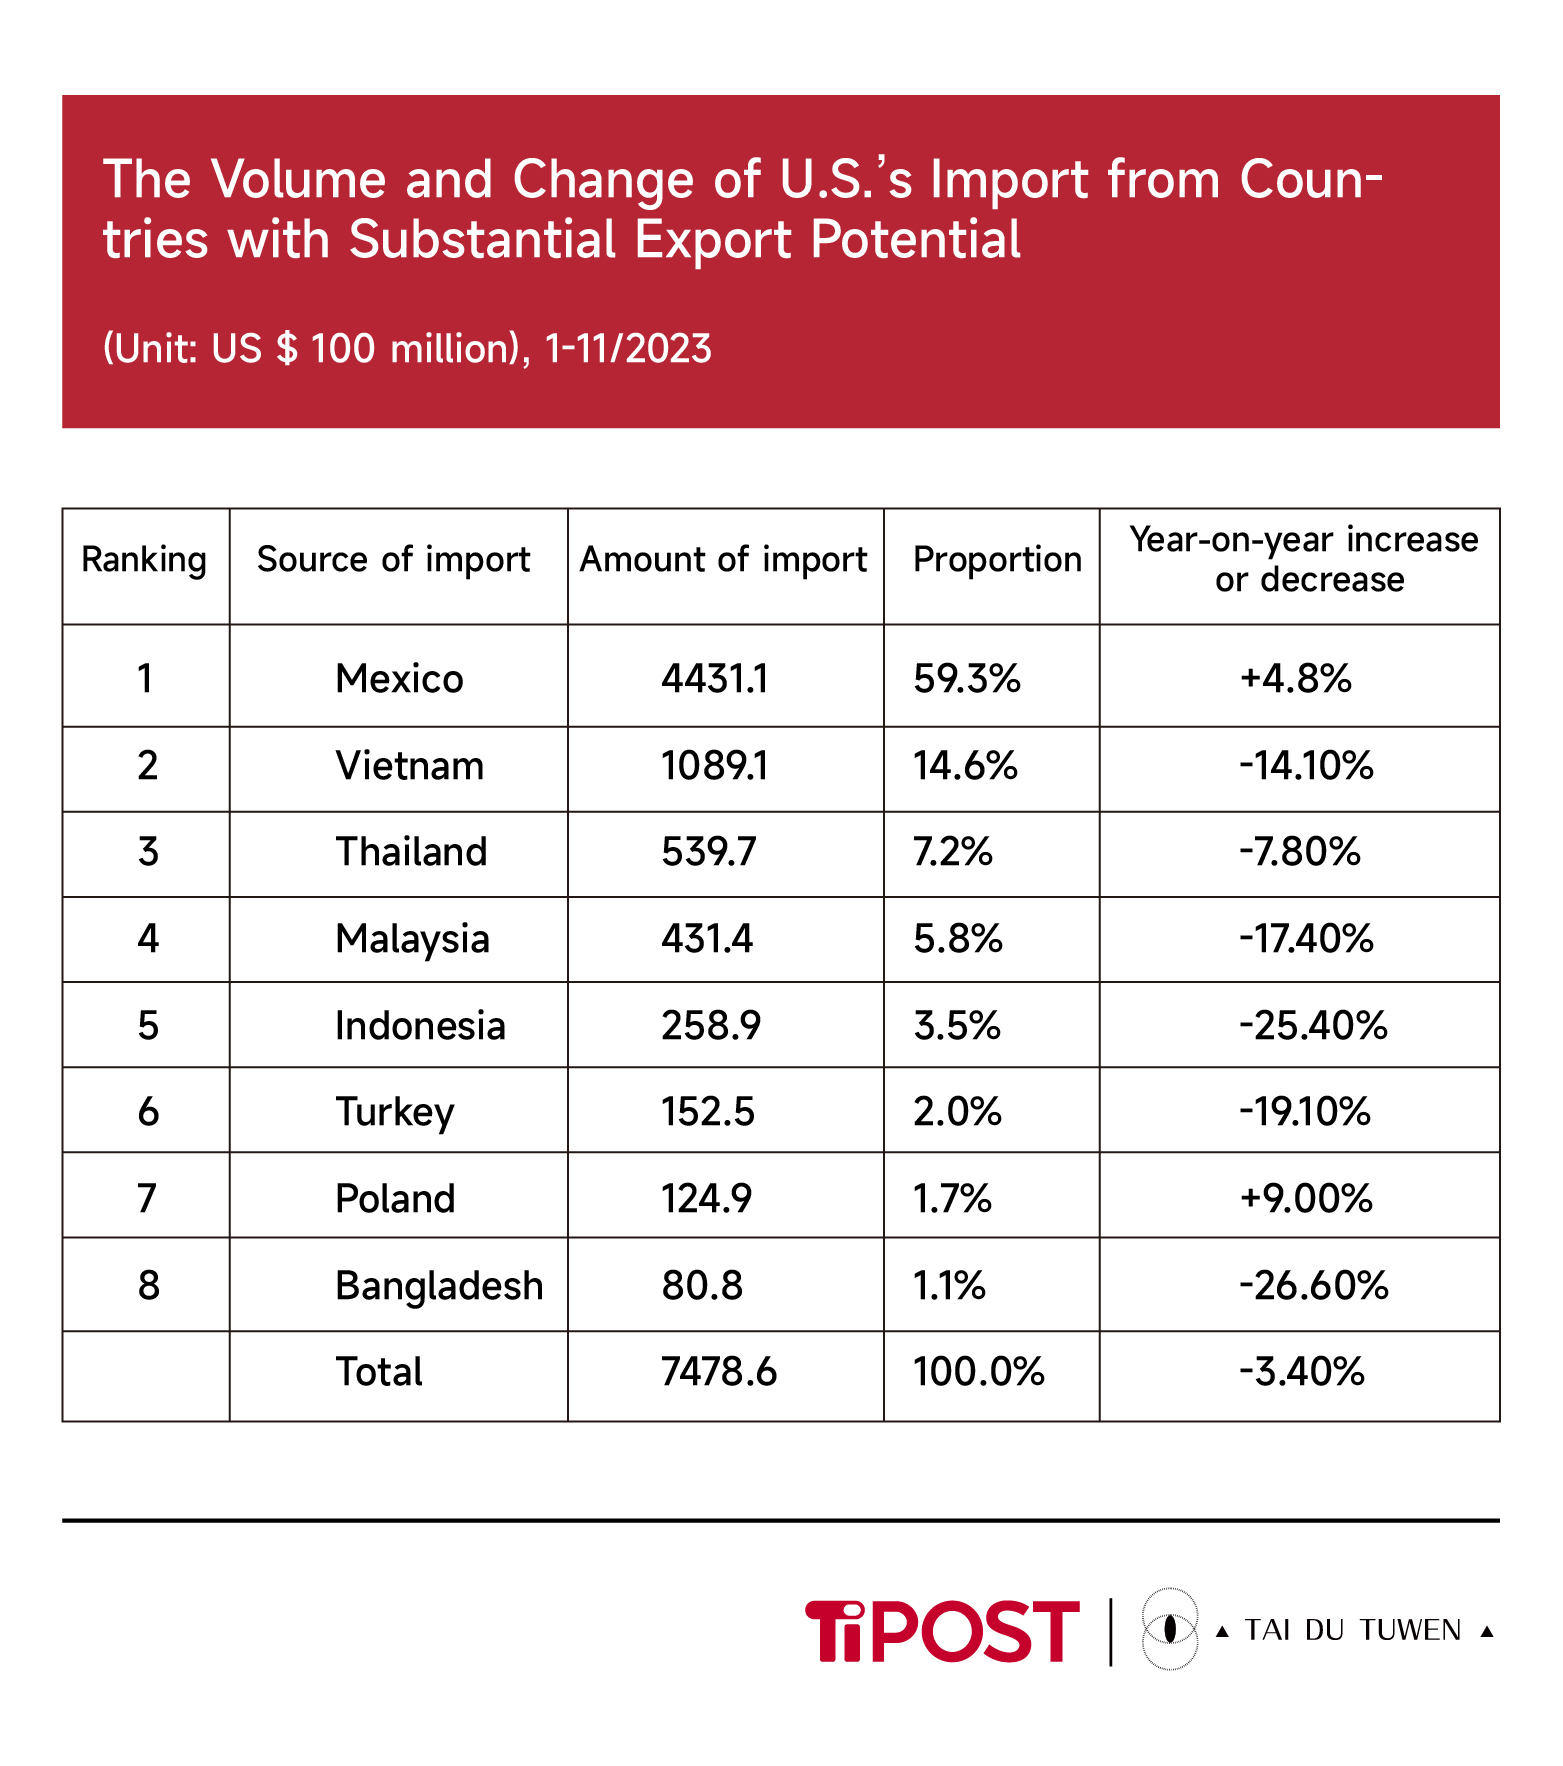 Source: GTF, cited from Weekly Foreign Trade Watch, Issue 190, China Center for International Electronic Commerce, Big Data Service, Department of Commerce